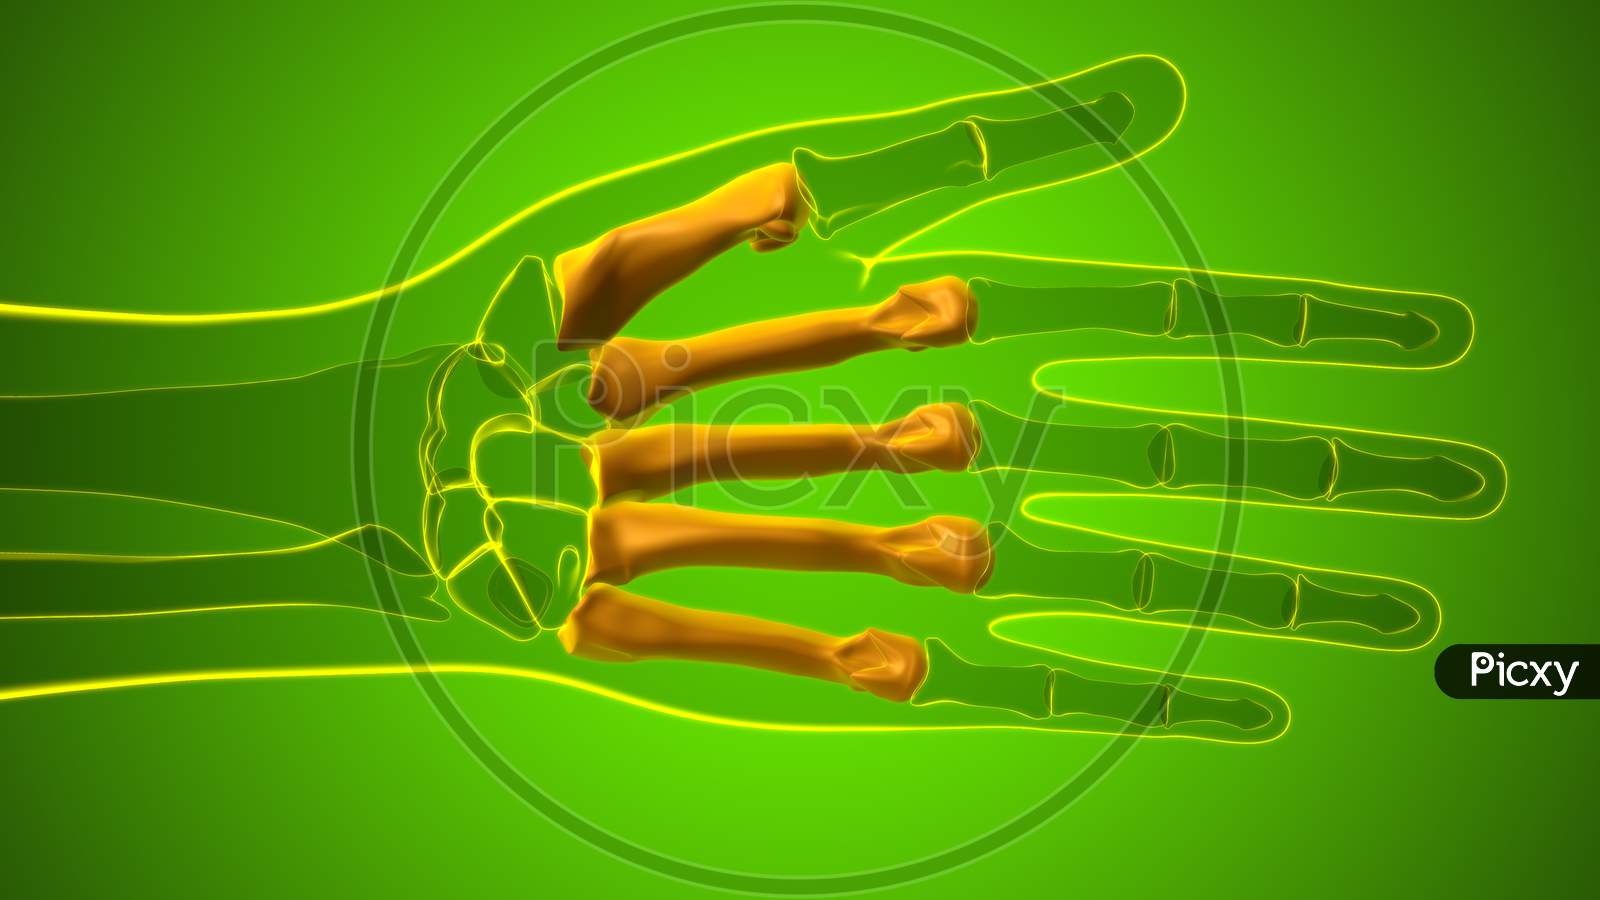 Image Of Human Skeleton Hand Phalanges Bone Anatomy For Medical Concept By812866 Picxy